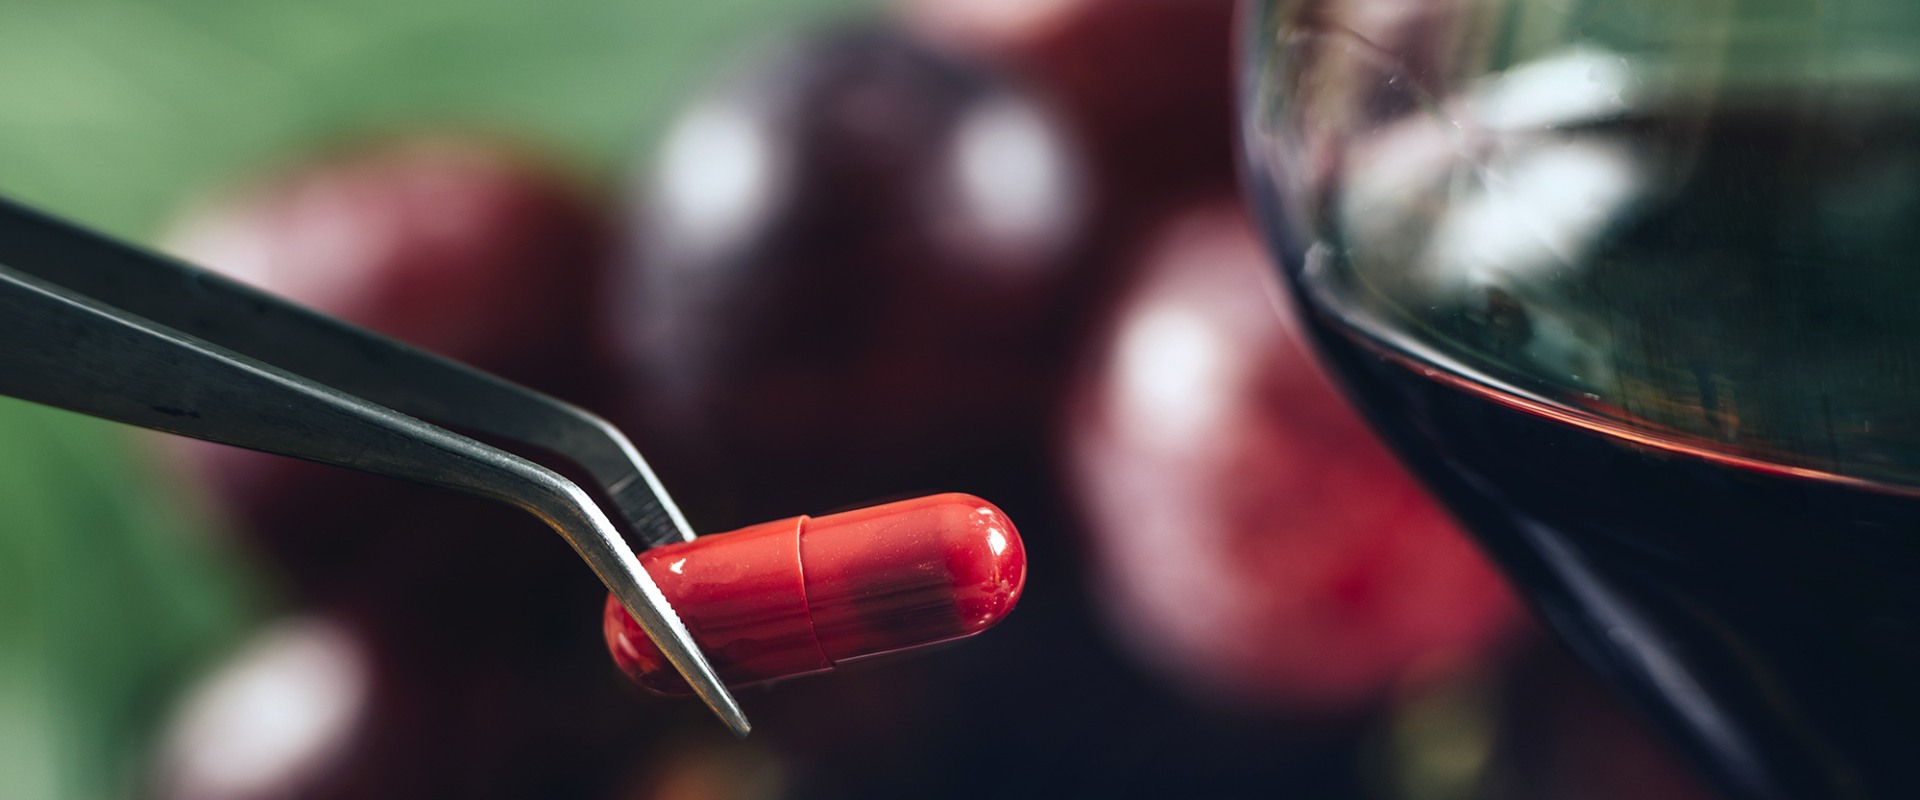 How much resveratrol per day for anti-aging?